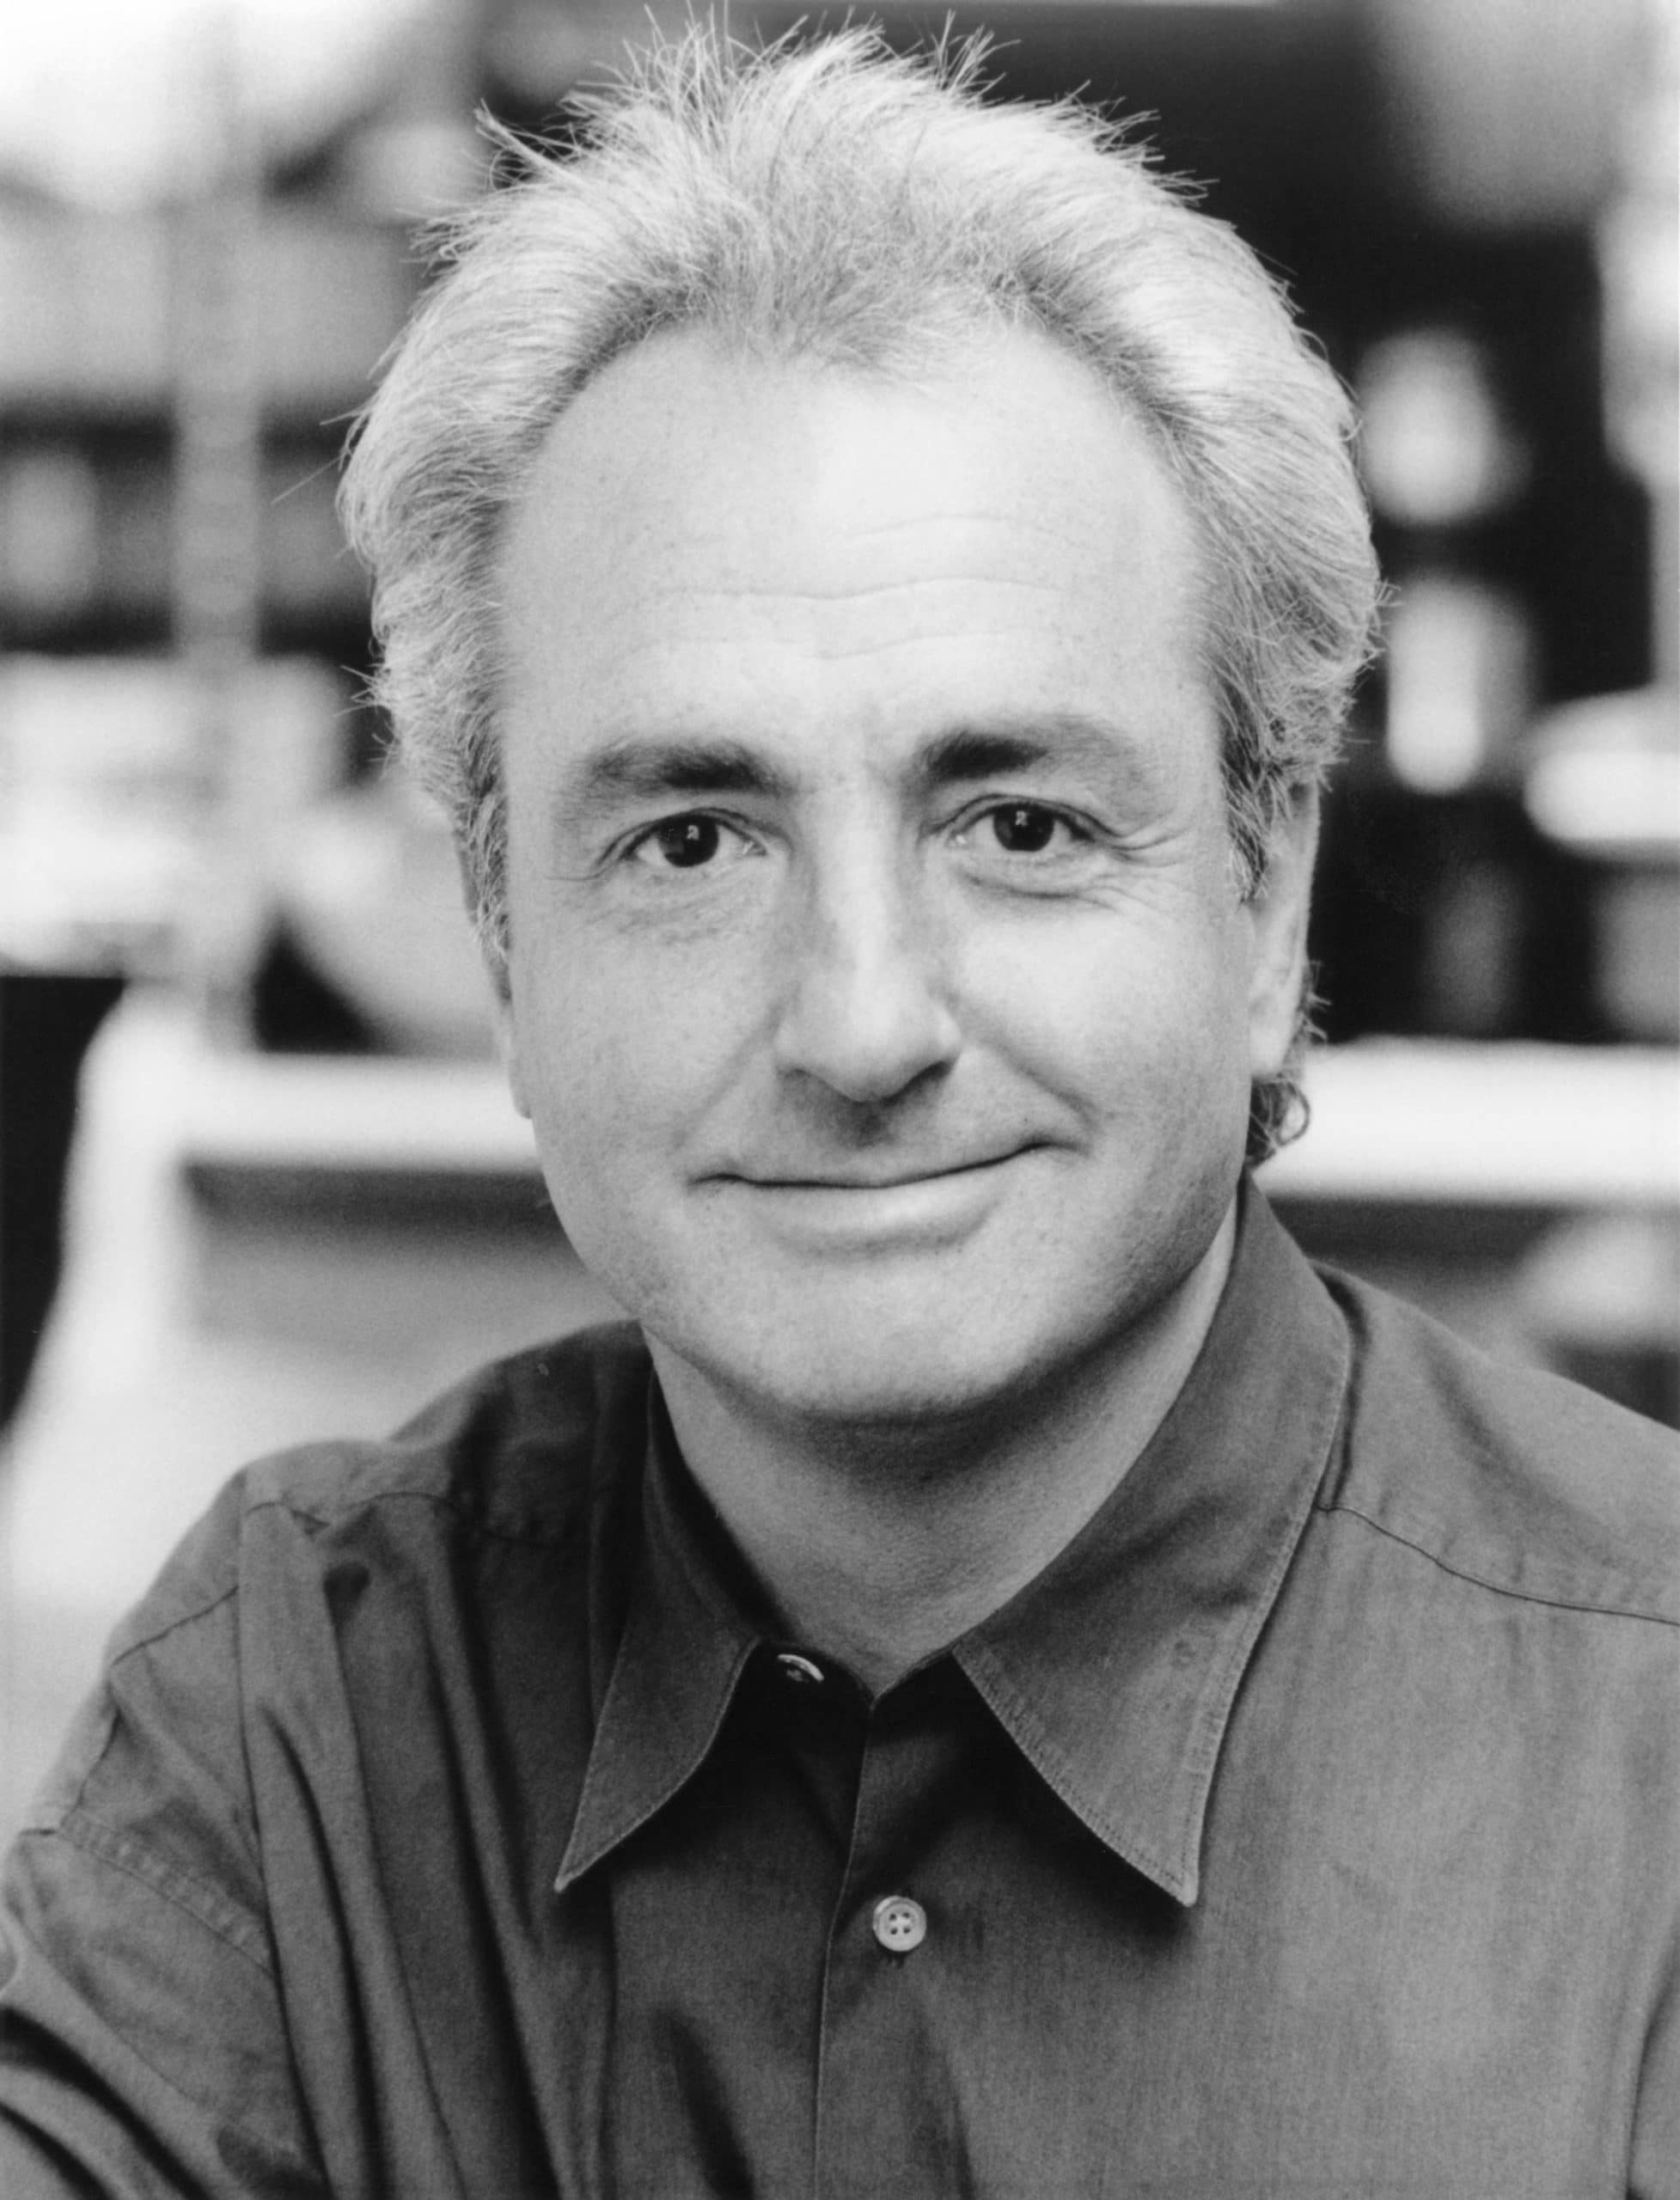 Lorne Michaels, Executive Producer of SATURDAY NIGHT LIVE